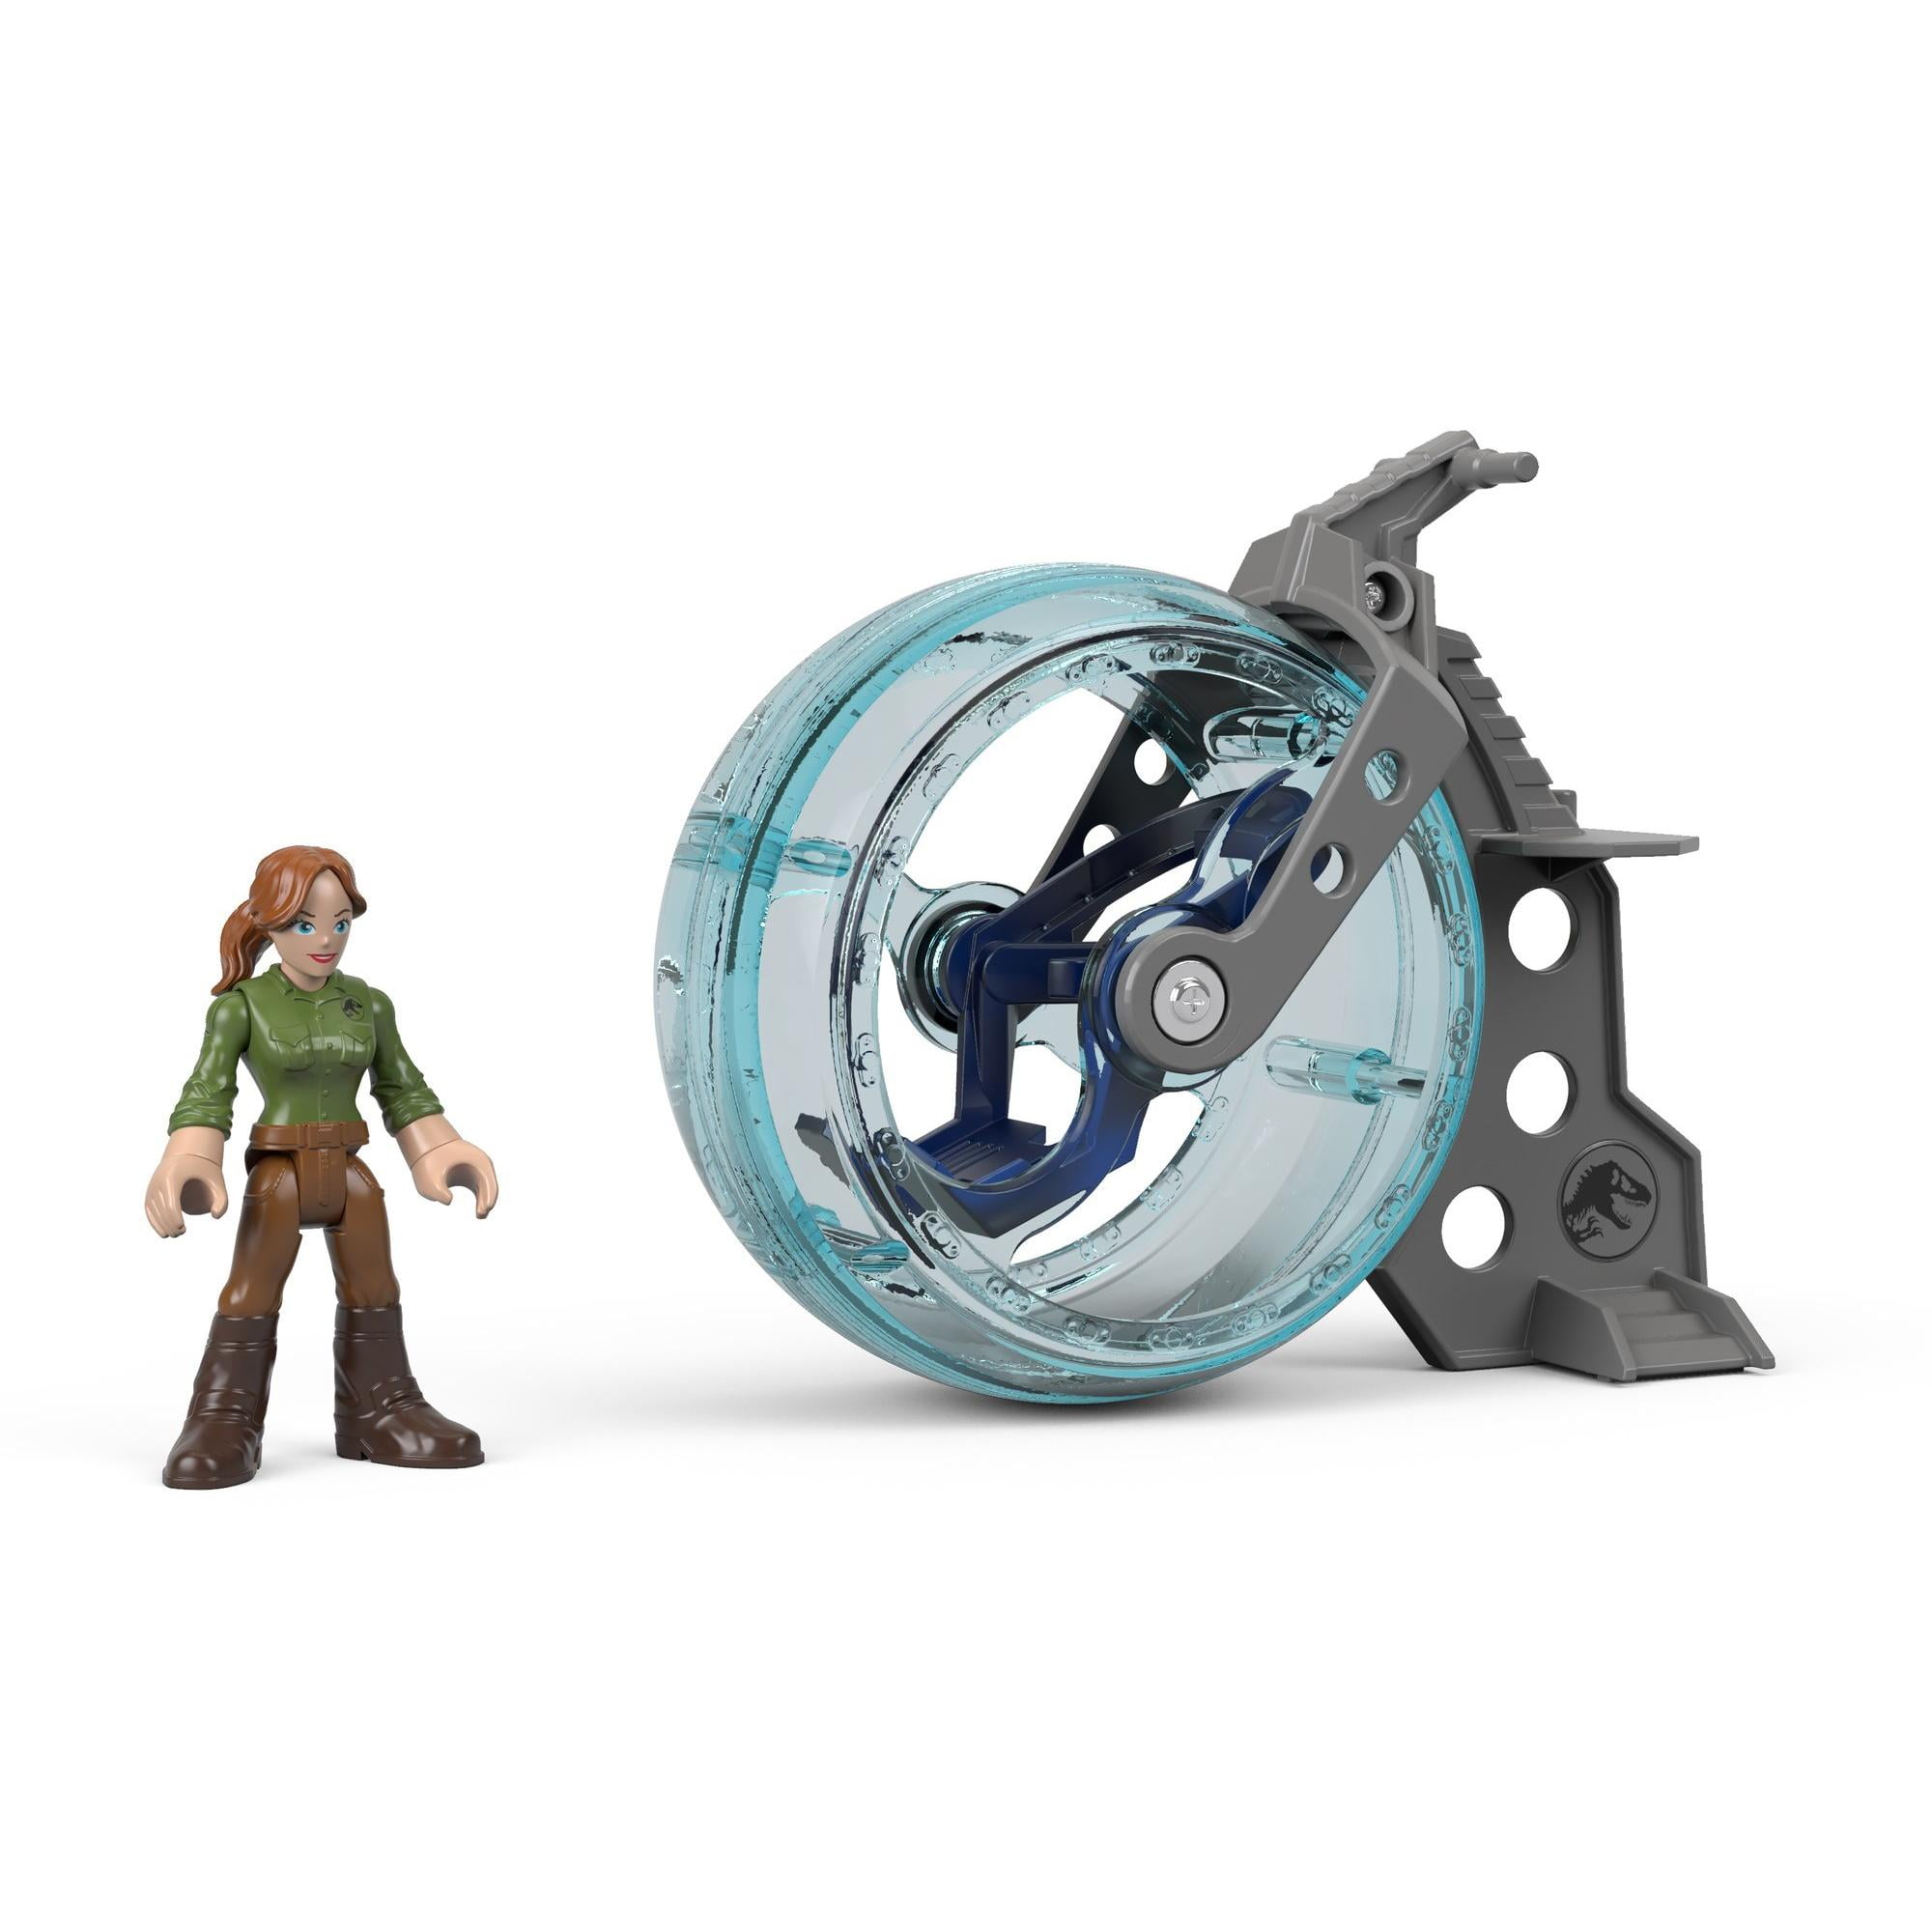 Imaginext Jurassic World Claire & Gyrosphere Action Figure Playset for sale online 